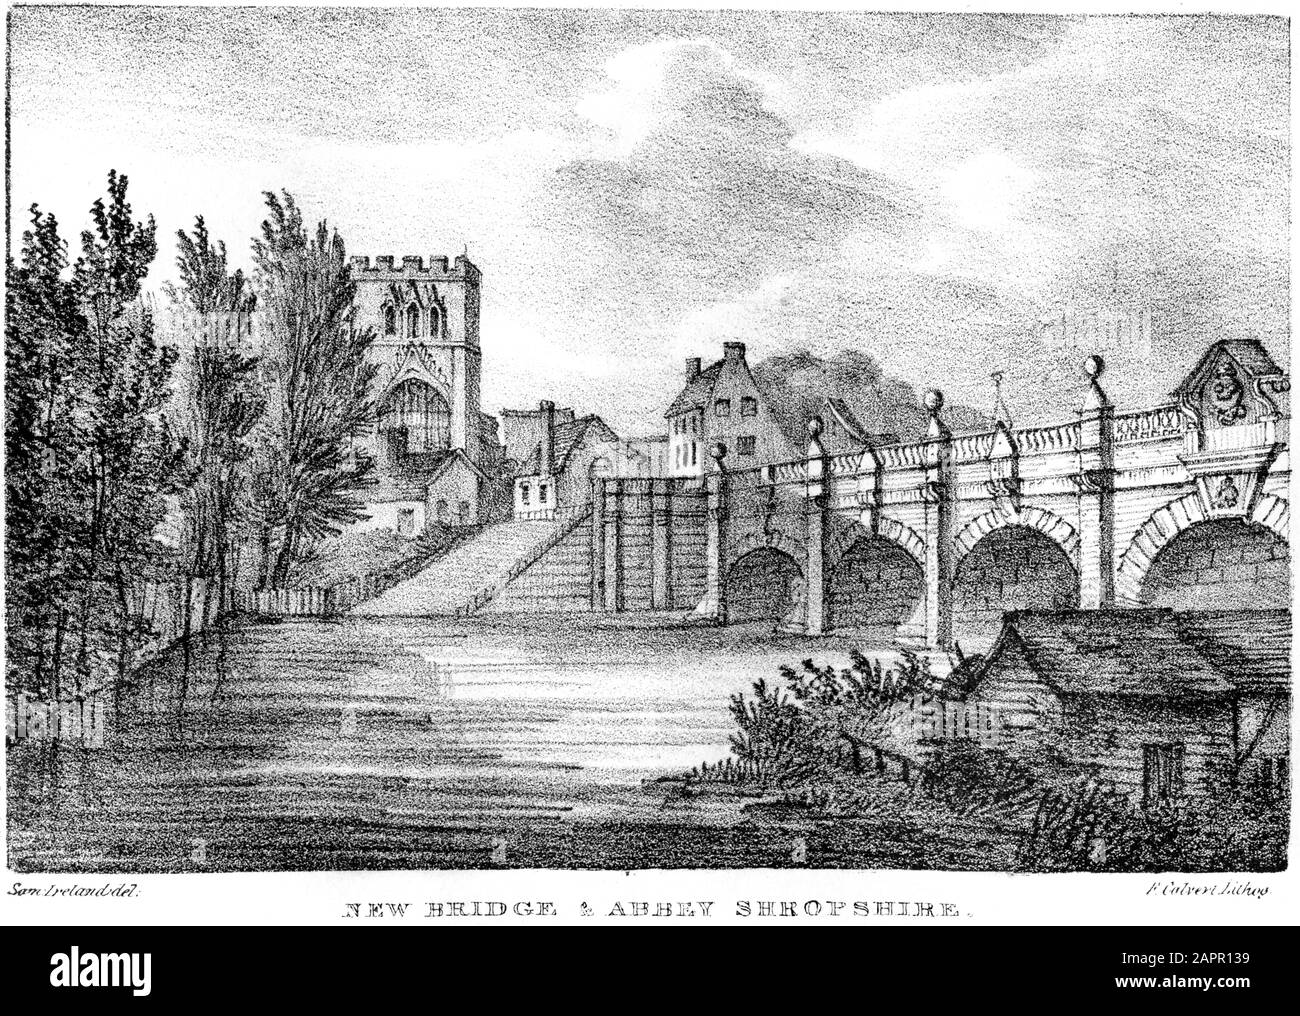 A lithograph of New Bridge & Abbey (Shrewsbury) Shropshire scanned at high resolution. from a book printed in 1824. Believed copyright free. Stock Photo